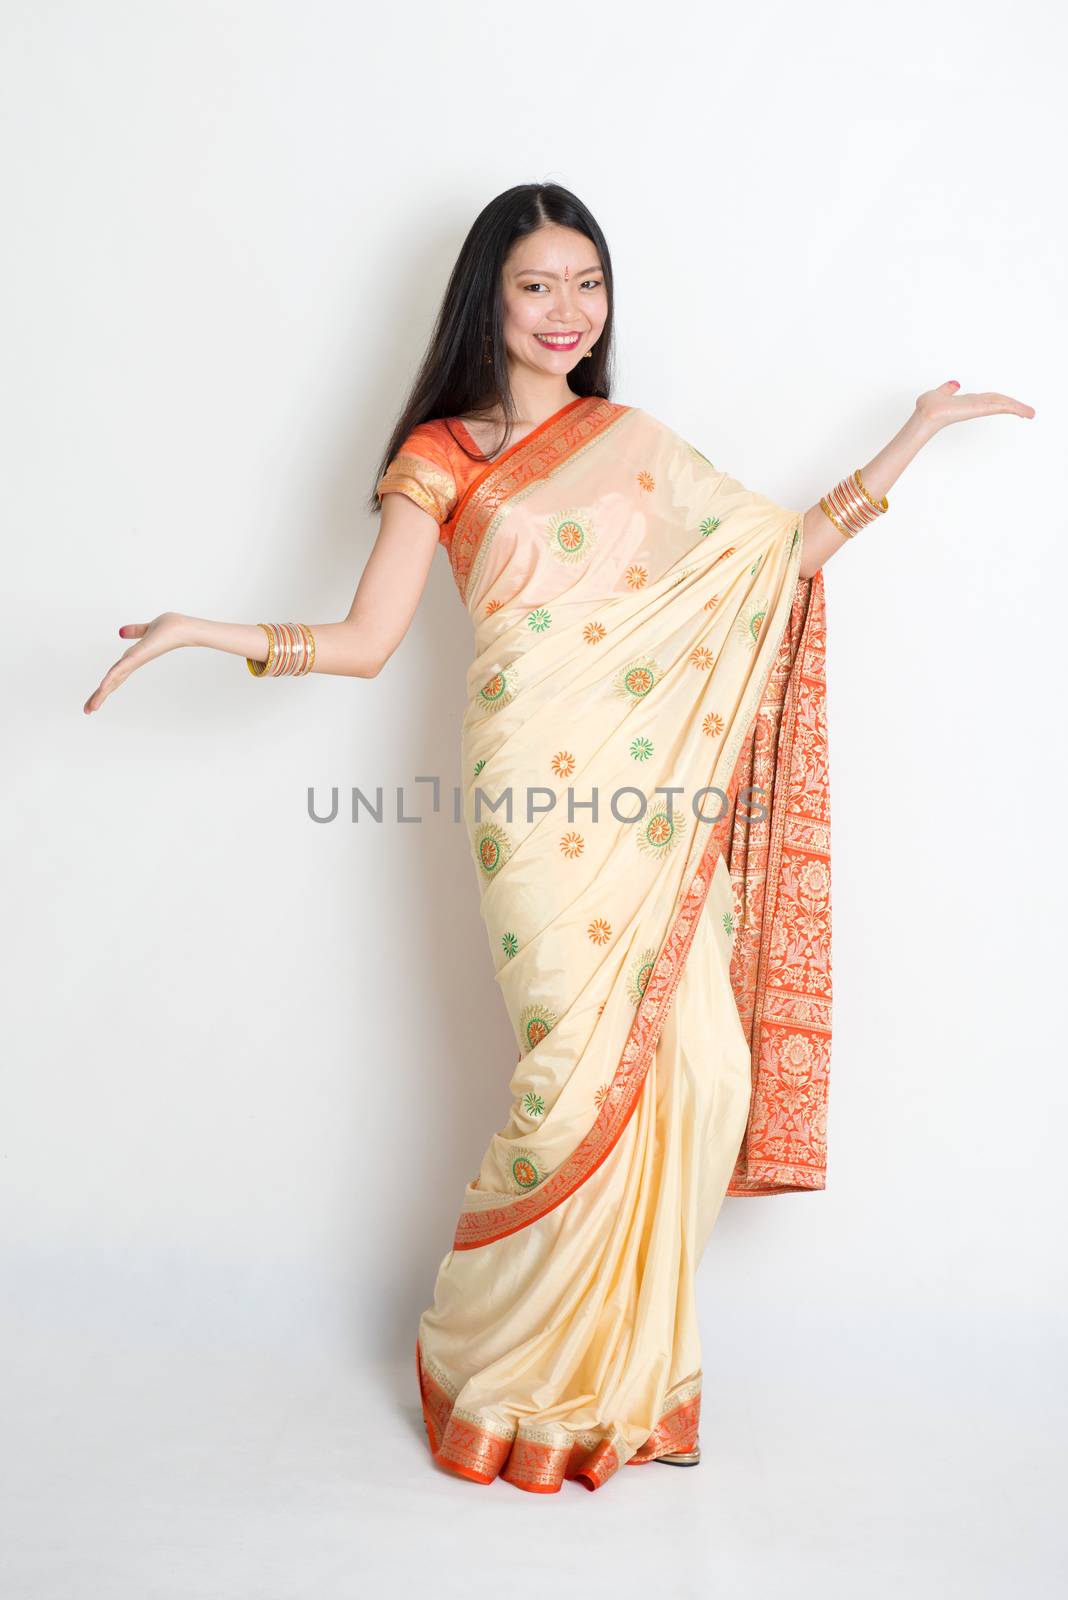 Portrait of young mixed race Indian Chinese woman in traditional sari dress dancing, on plain background.